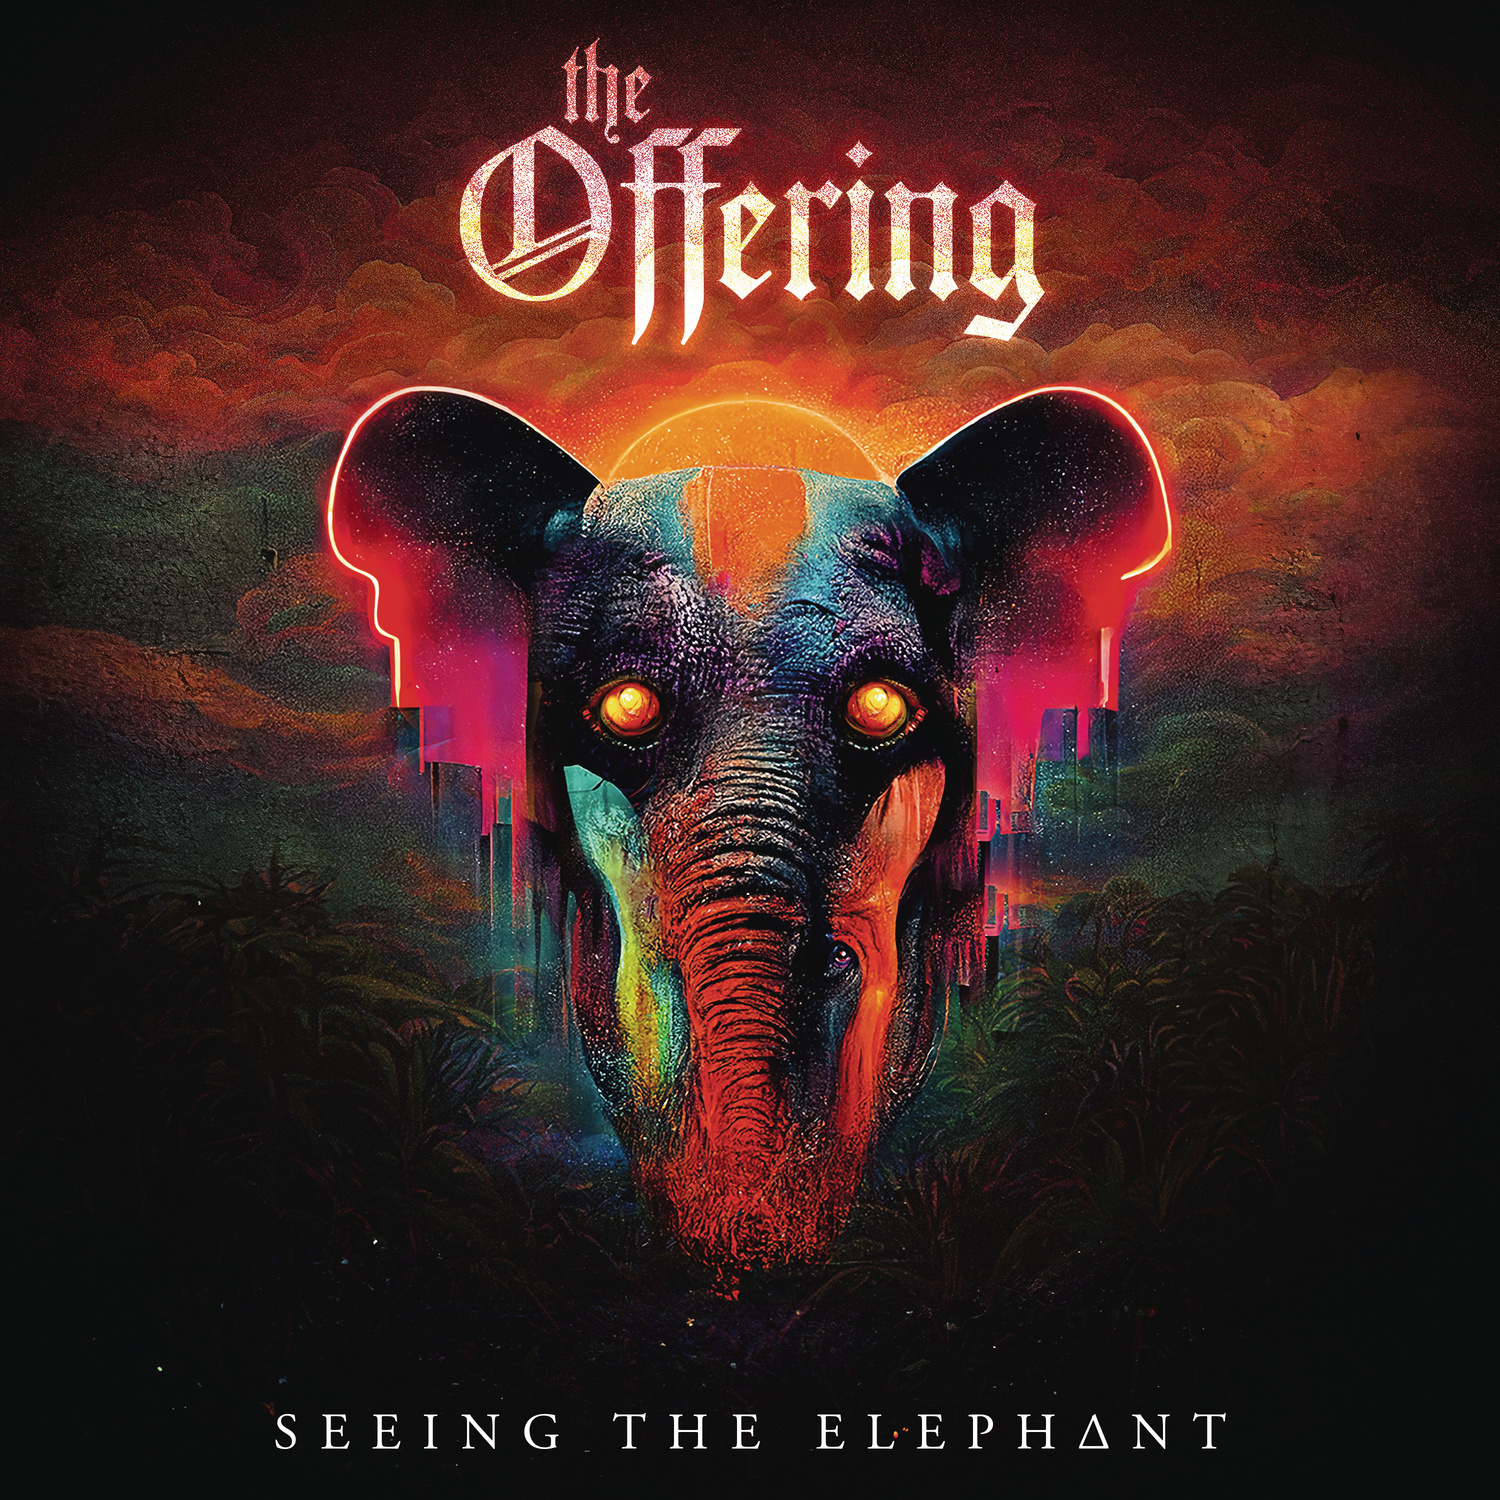 SEEING THE ELEPHANT